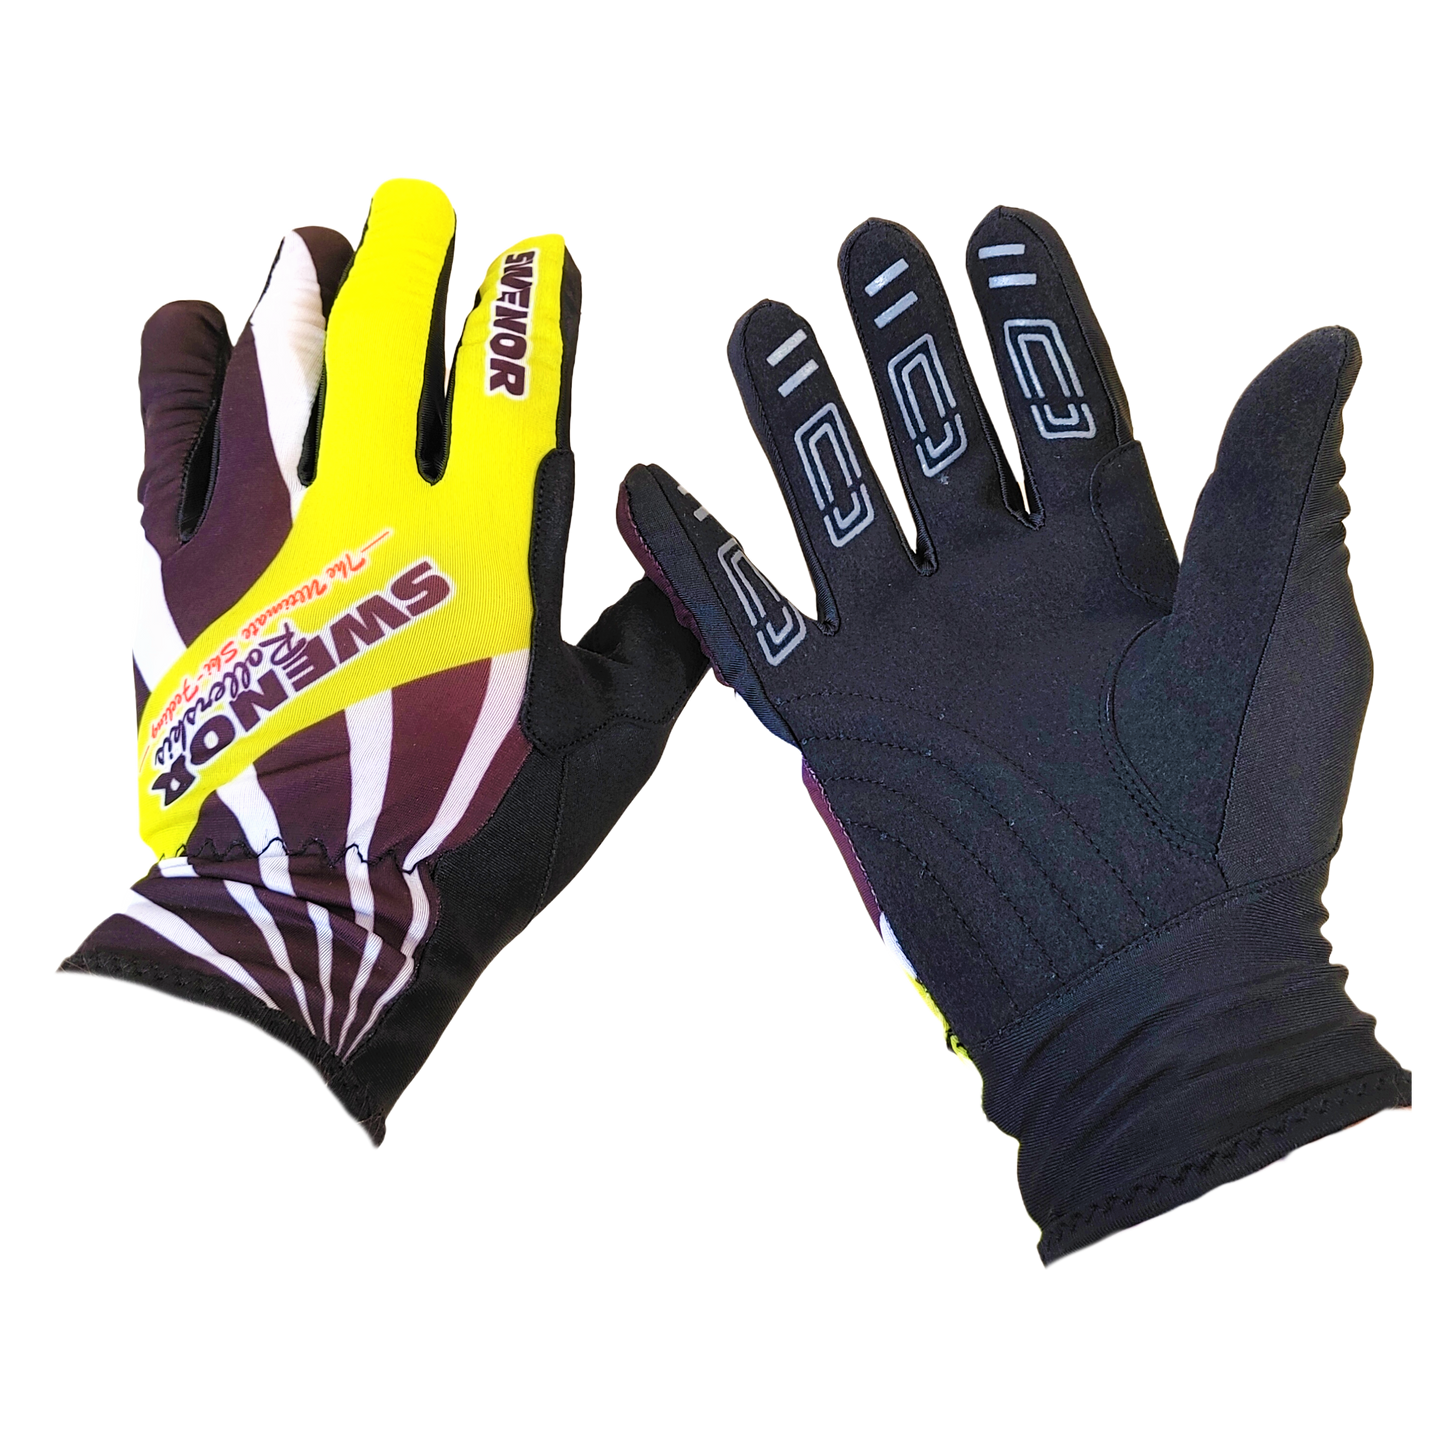 A product picture of the Swenor Rollerski Gloves